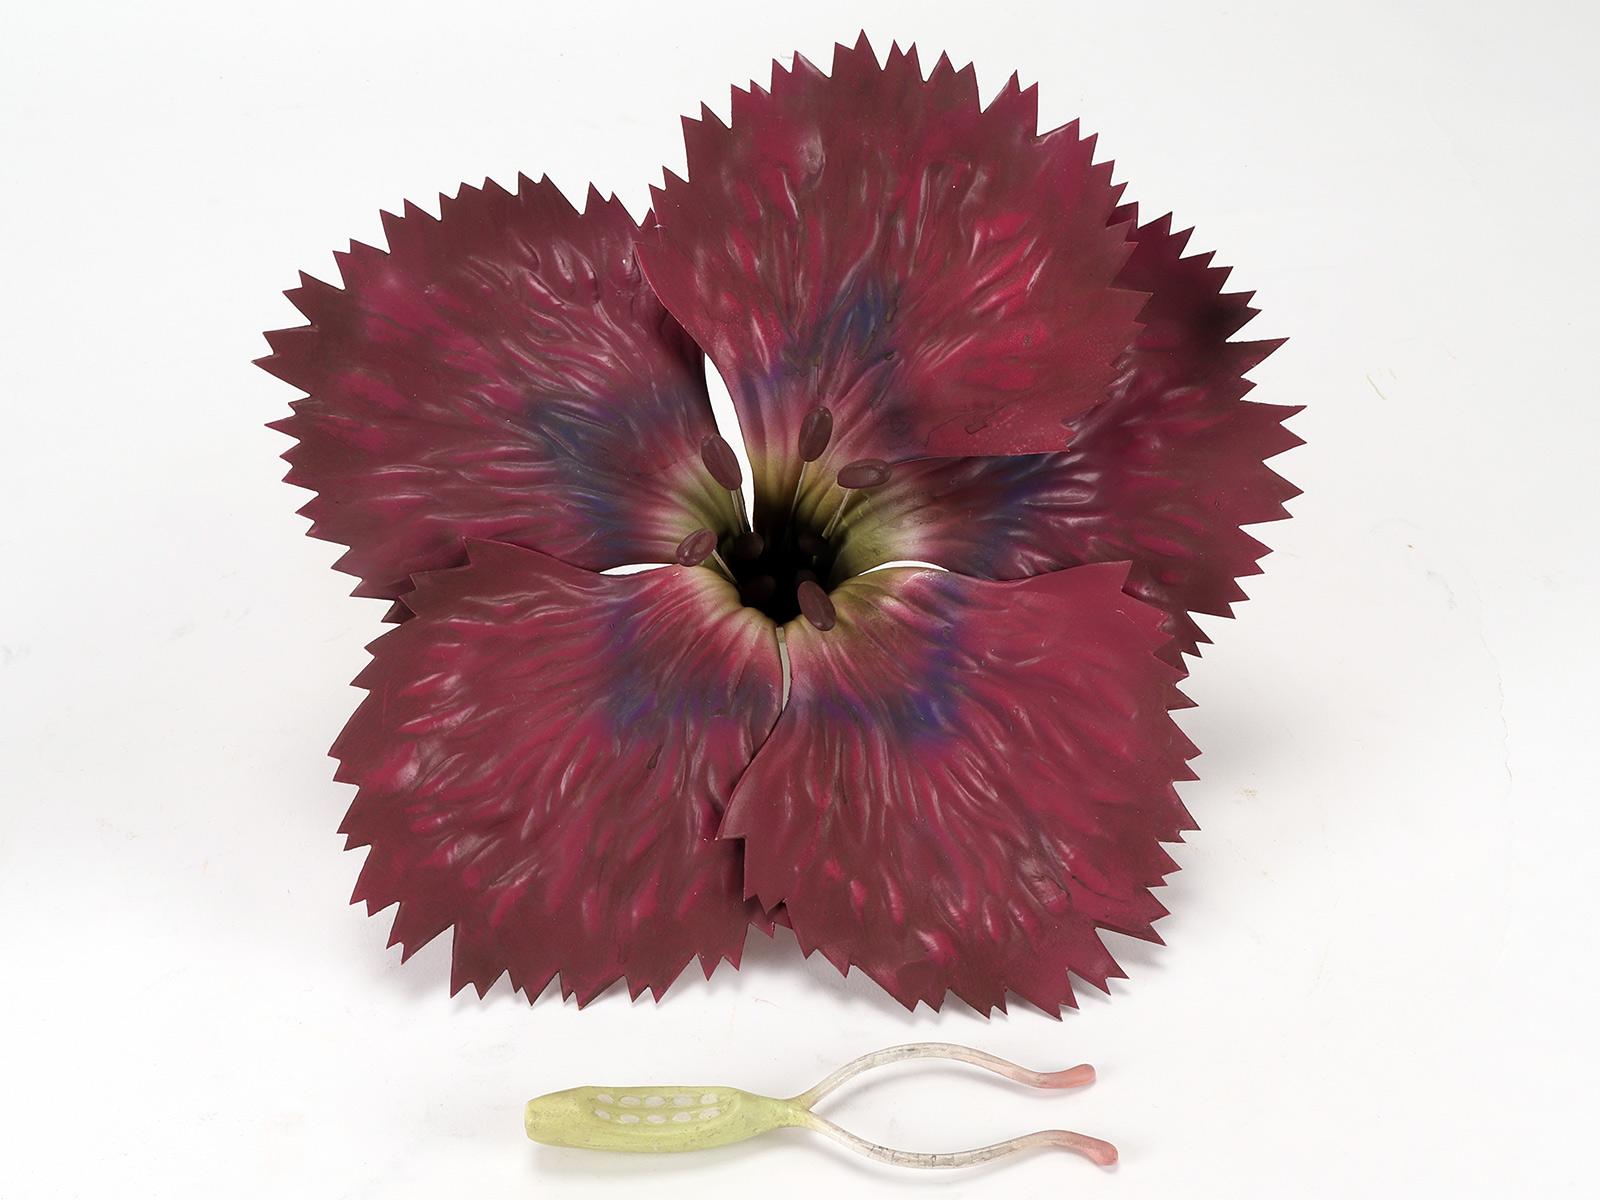 Metal Botanic Model of a Carnation Flower, Paravia Italy, 1940 For Sale